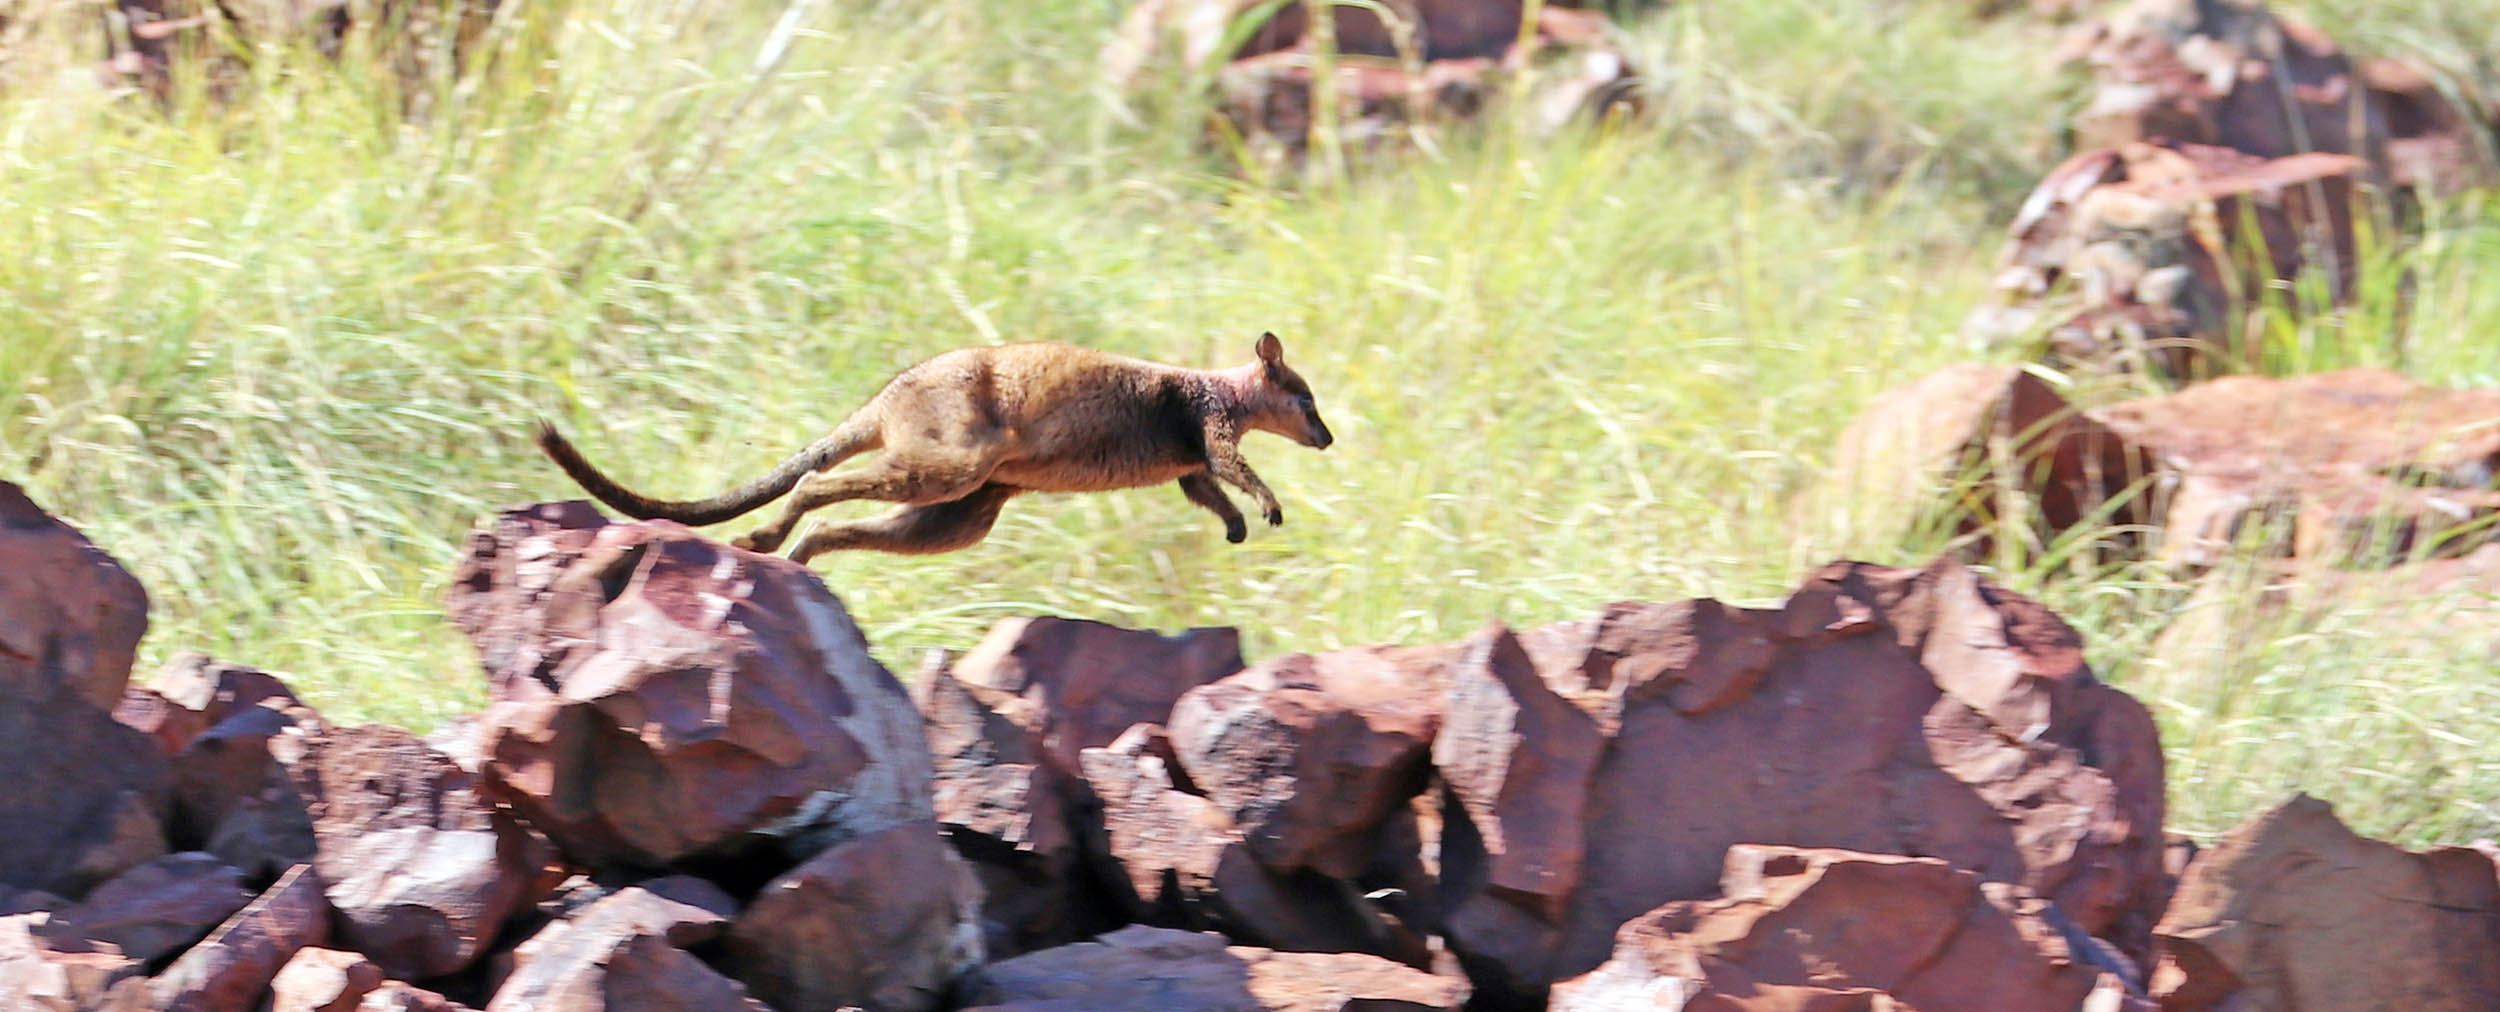 rock-wallaby-rothschilds-leaping